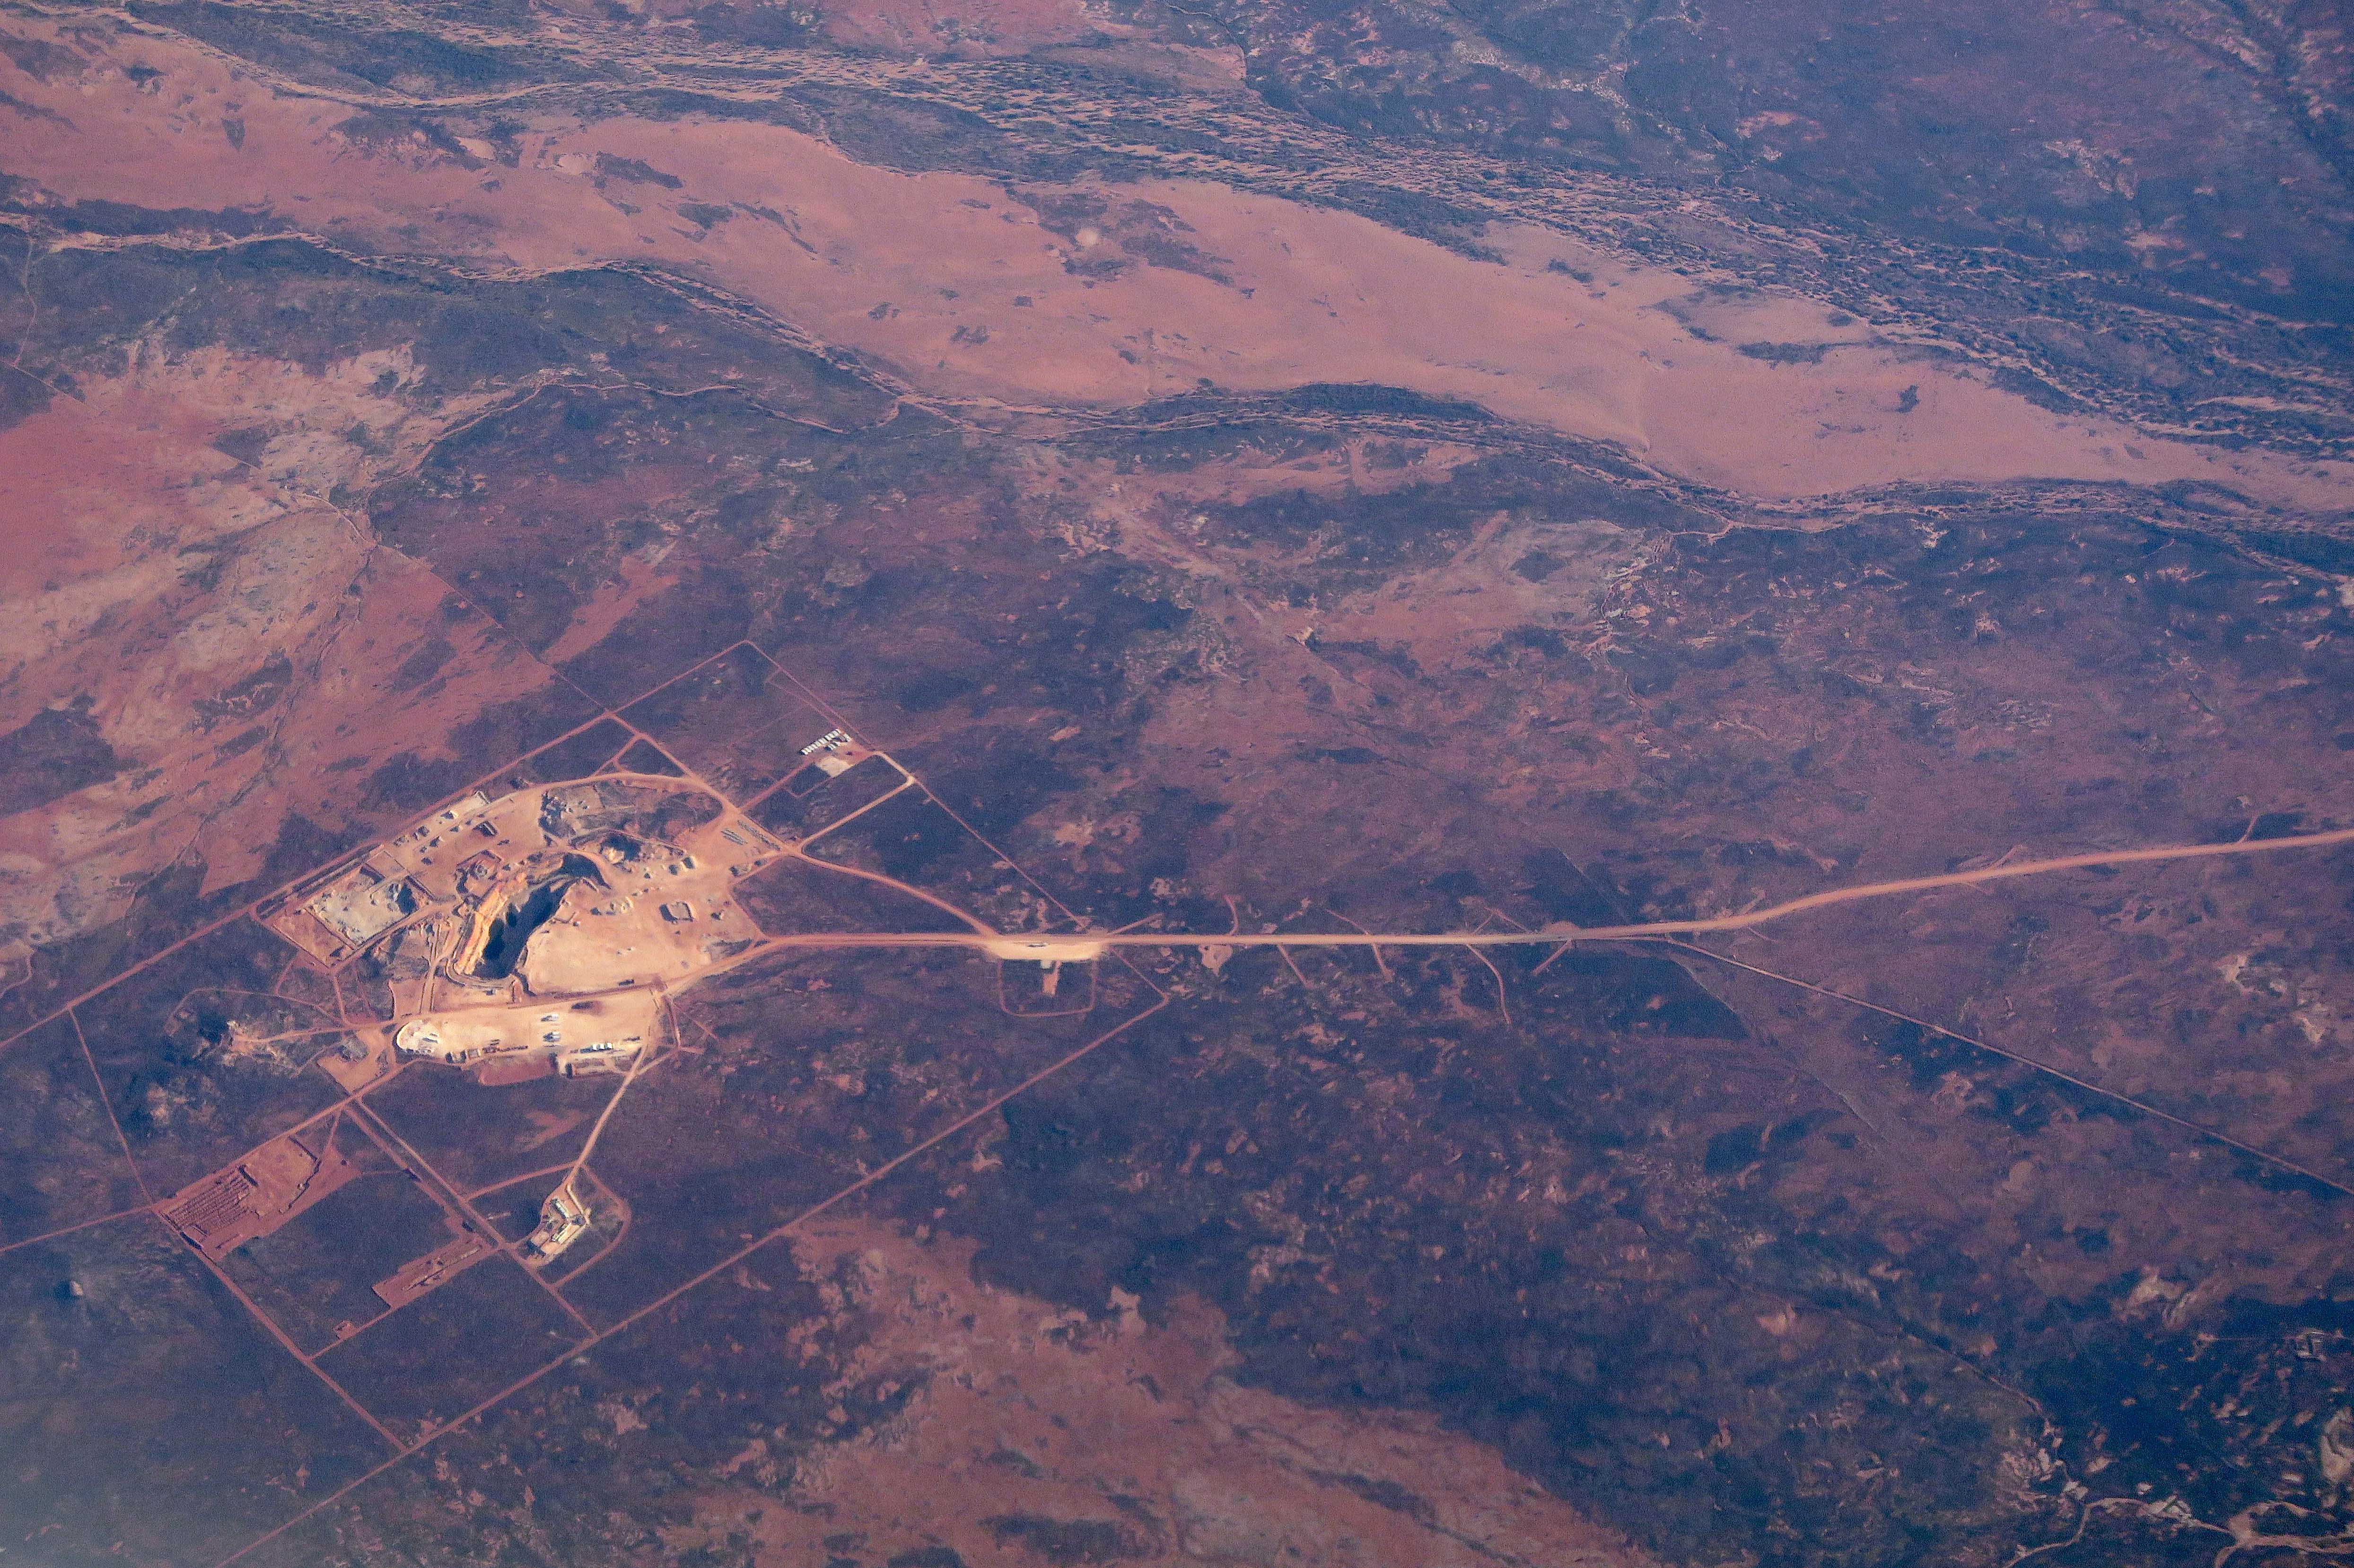 A road leads to an open-cut mine in the area known as the Pilbara region located in the north-west of Western Australia